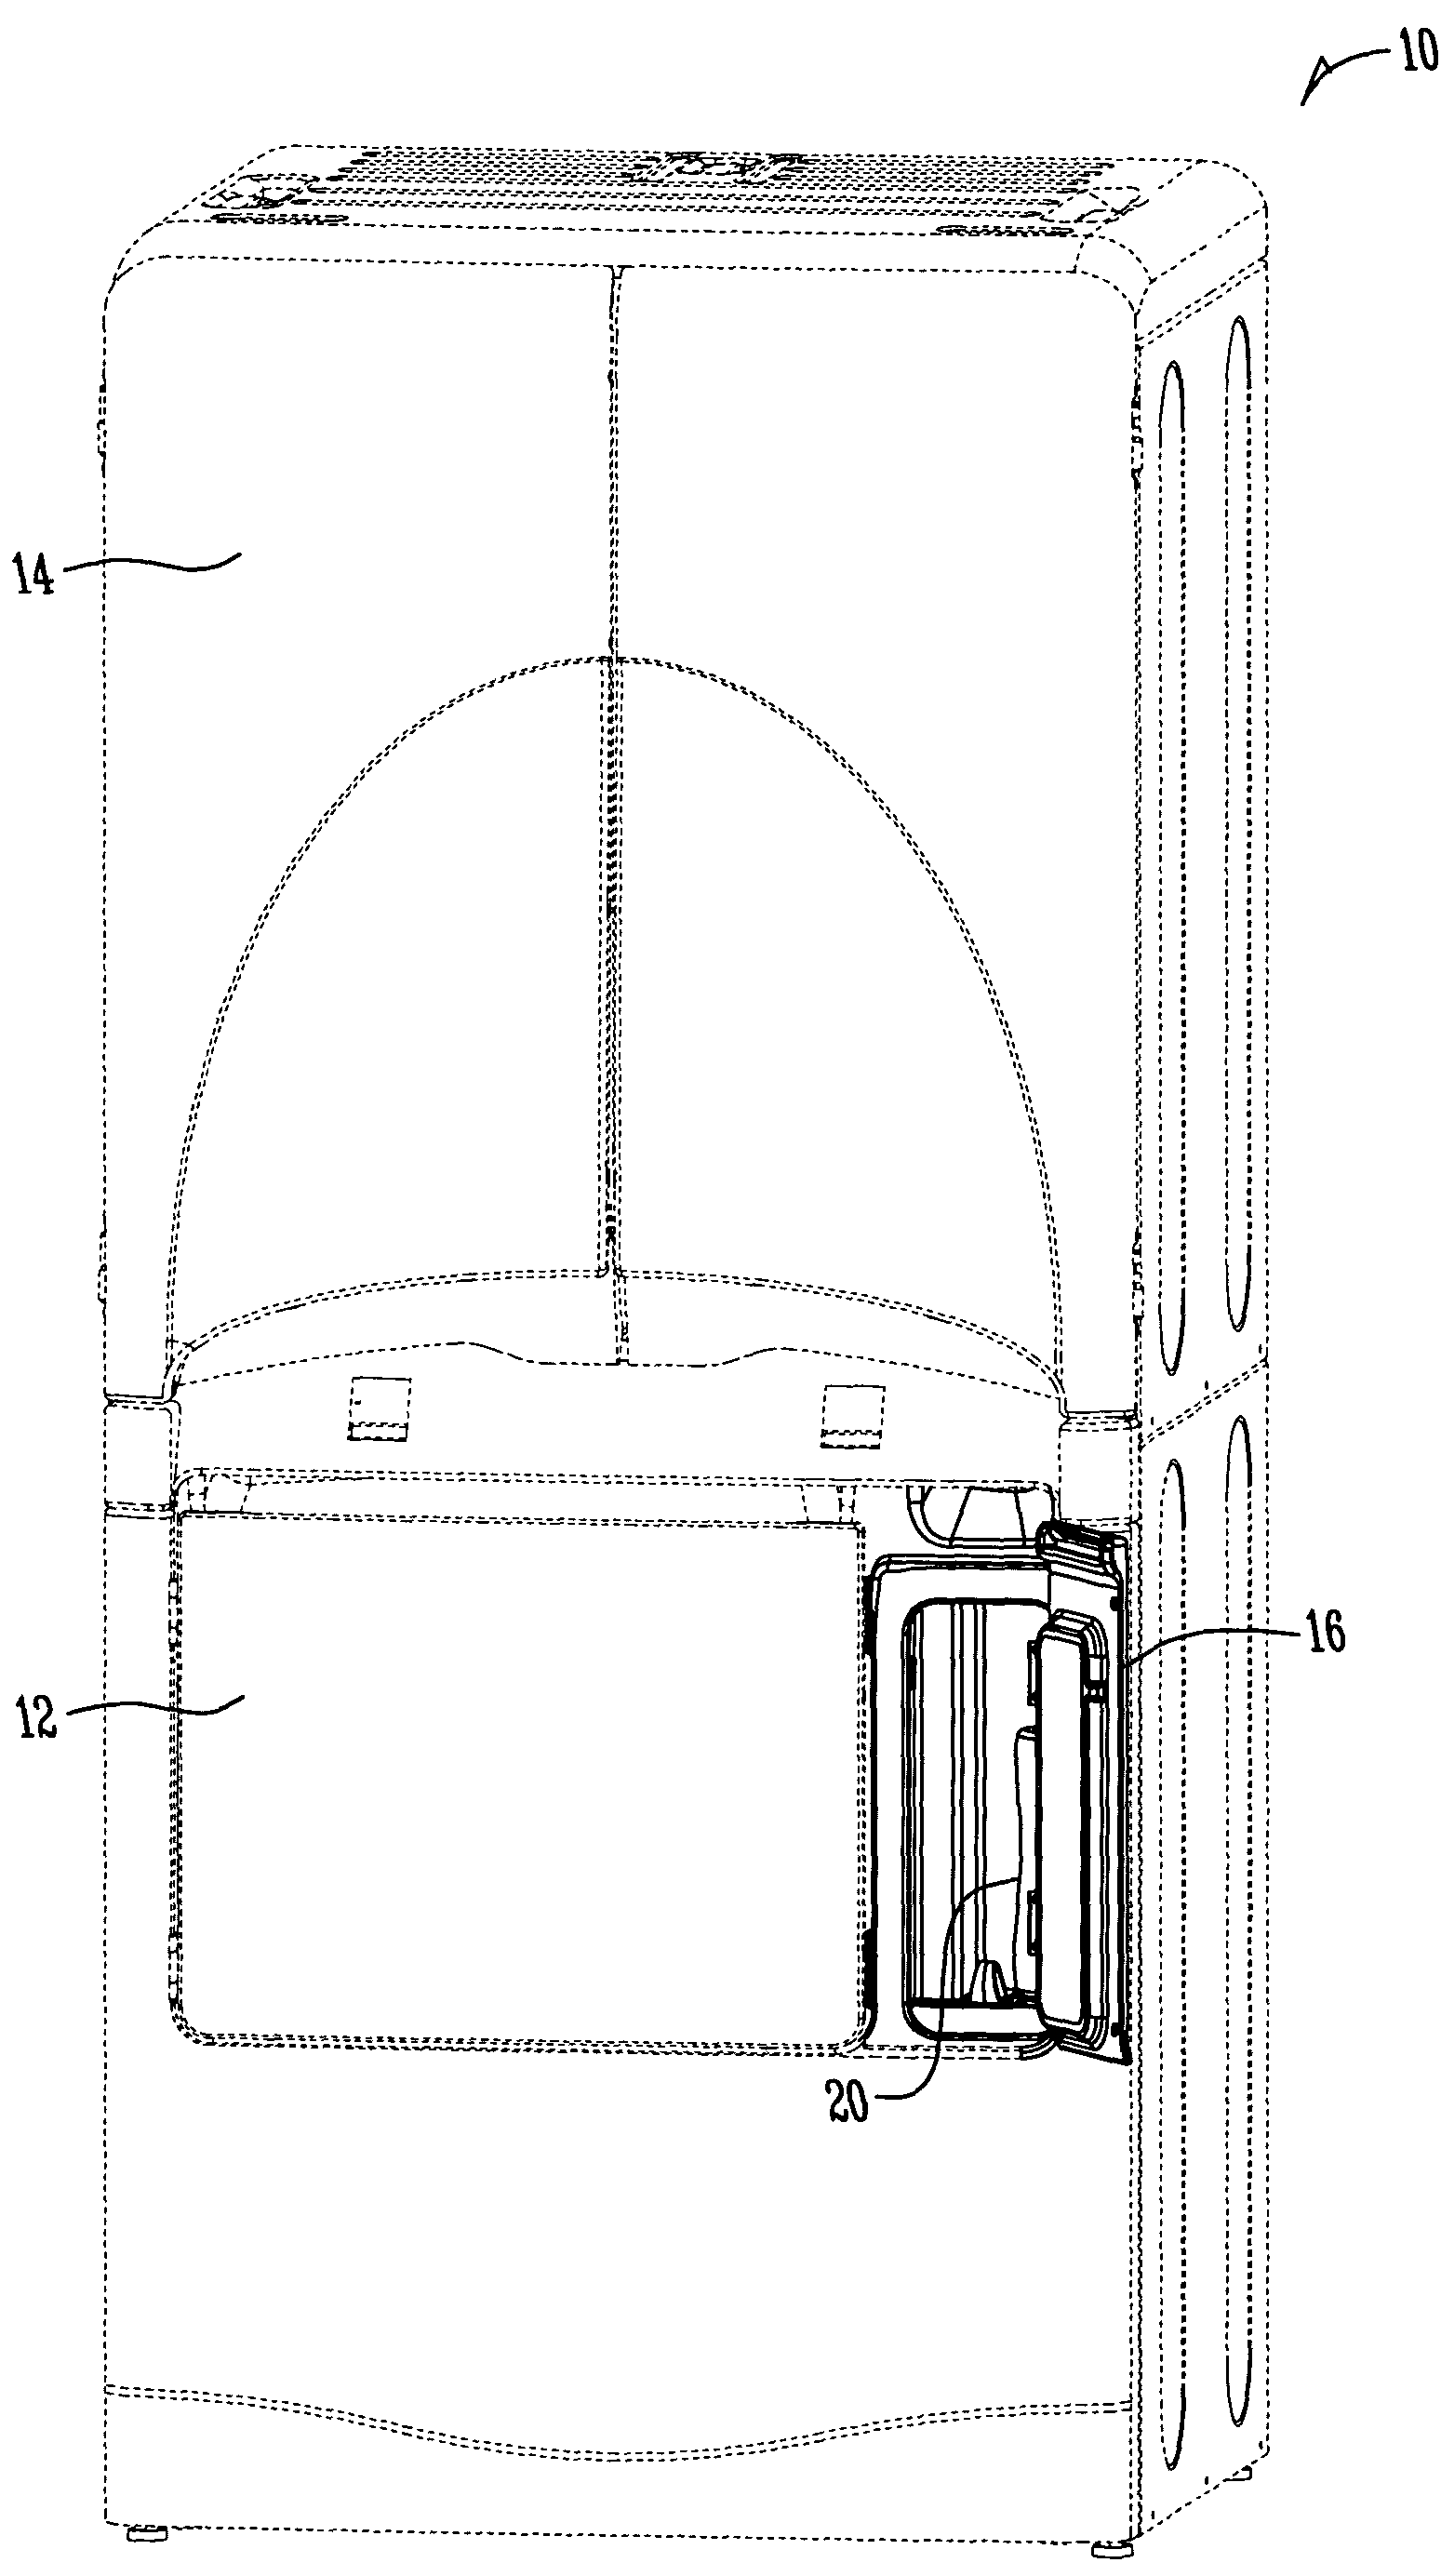 Delayed flow water reservoir for a clothes drying cabinet and method of use